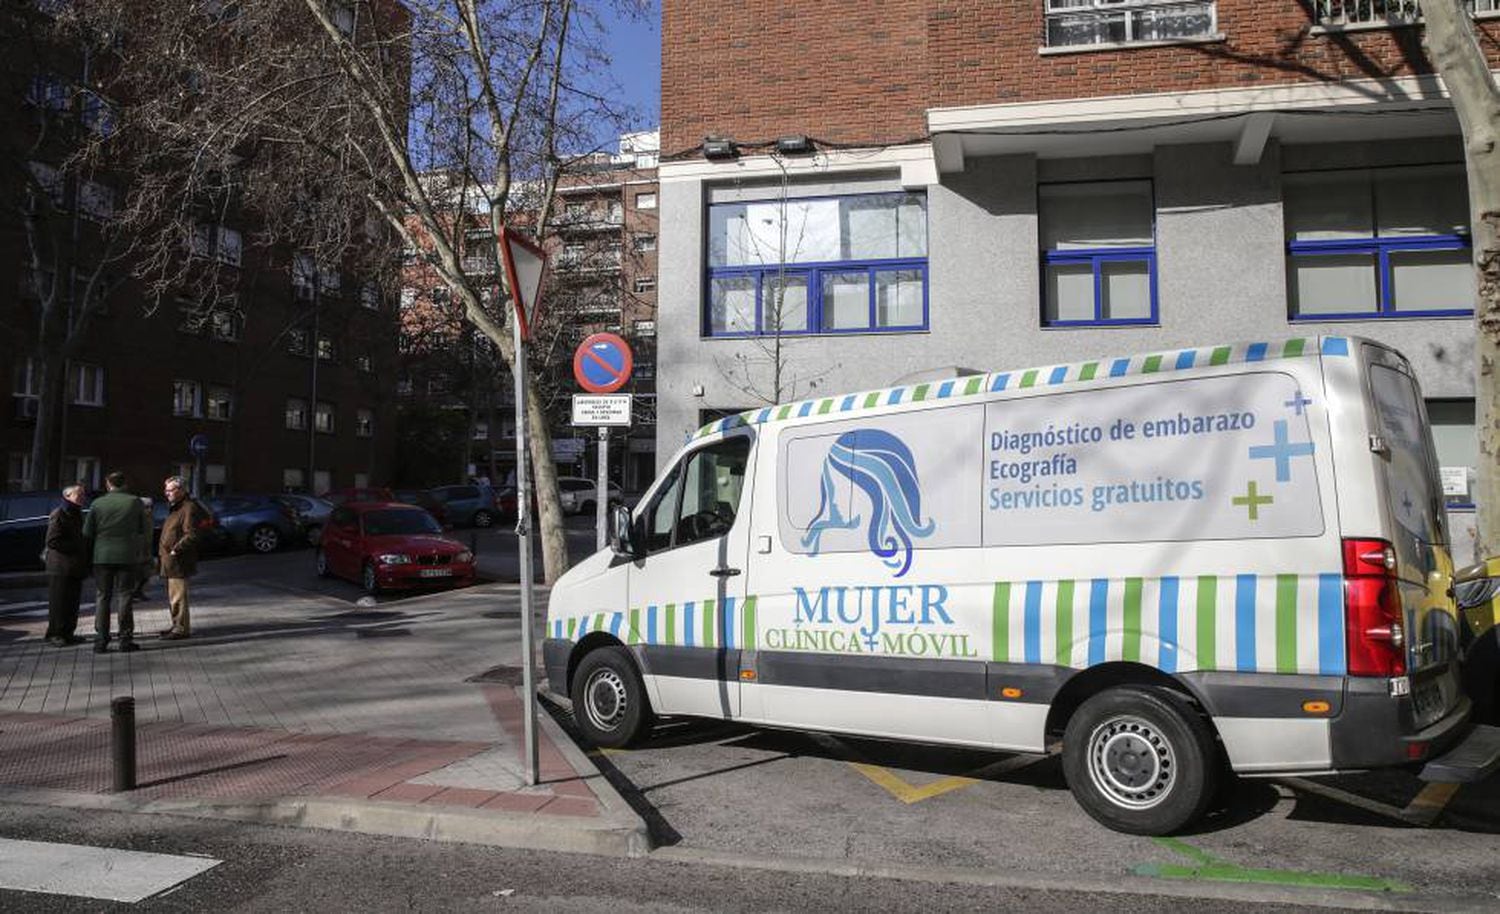 A doctor and Vox lawmaker, Gador Joya, has been offering ultrasounds outside the Dator clinic in Madrid.